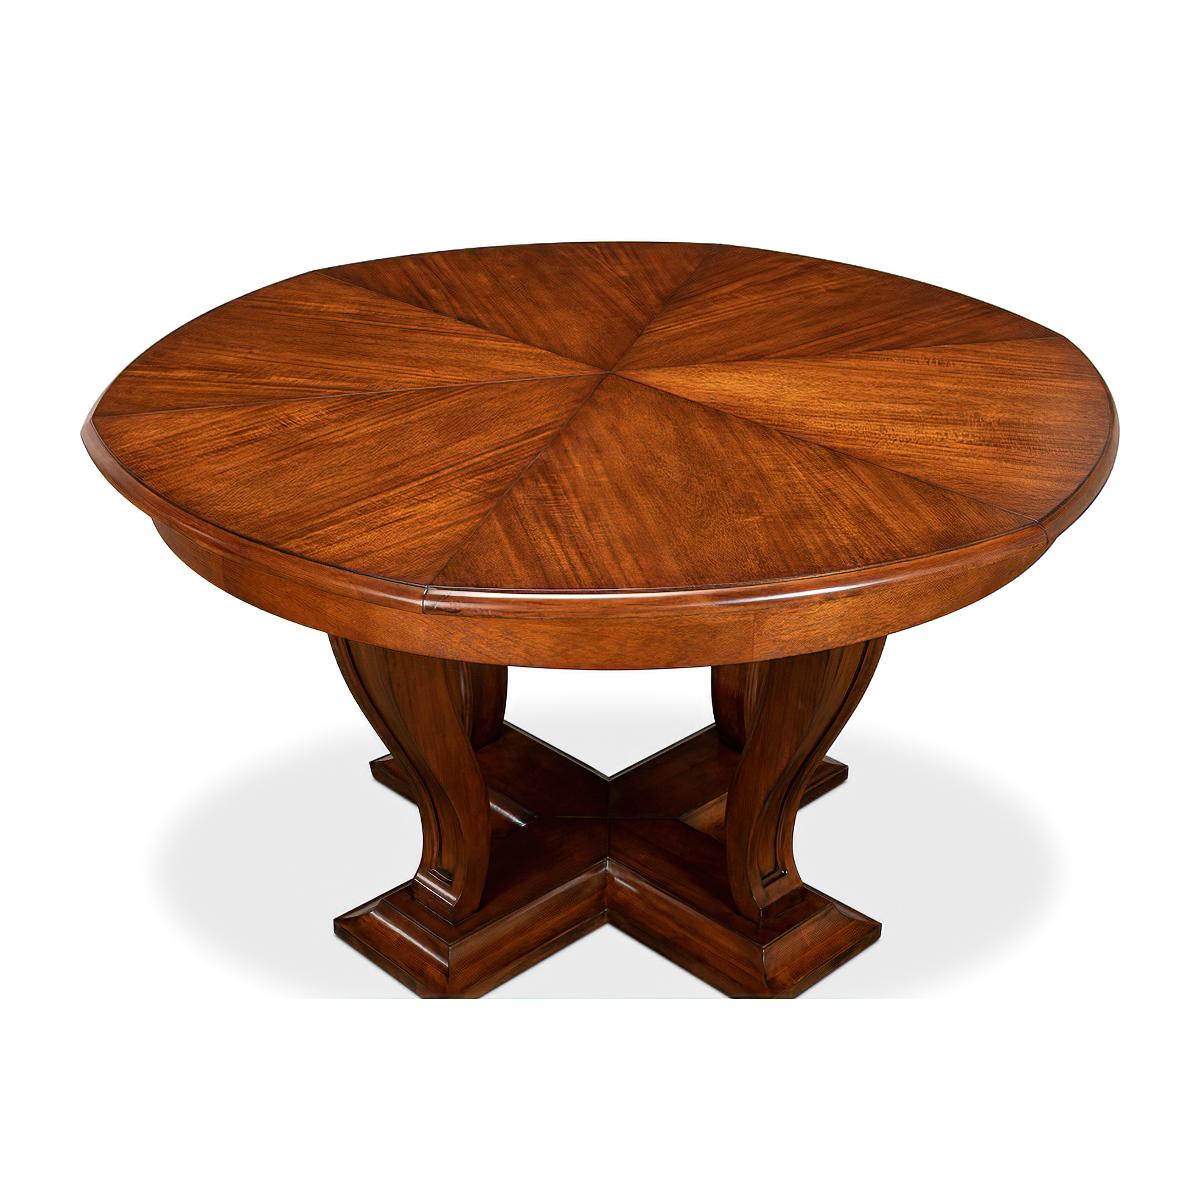 Contemporary Art Deco Style Walnut Round Dining Table For Sale